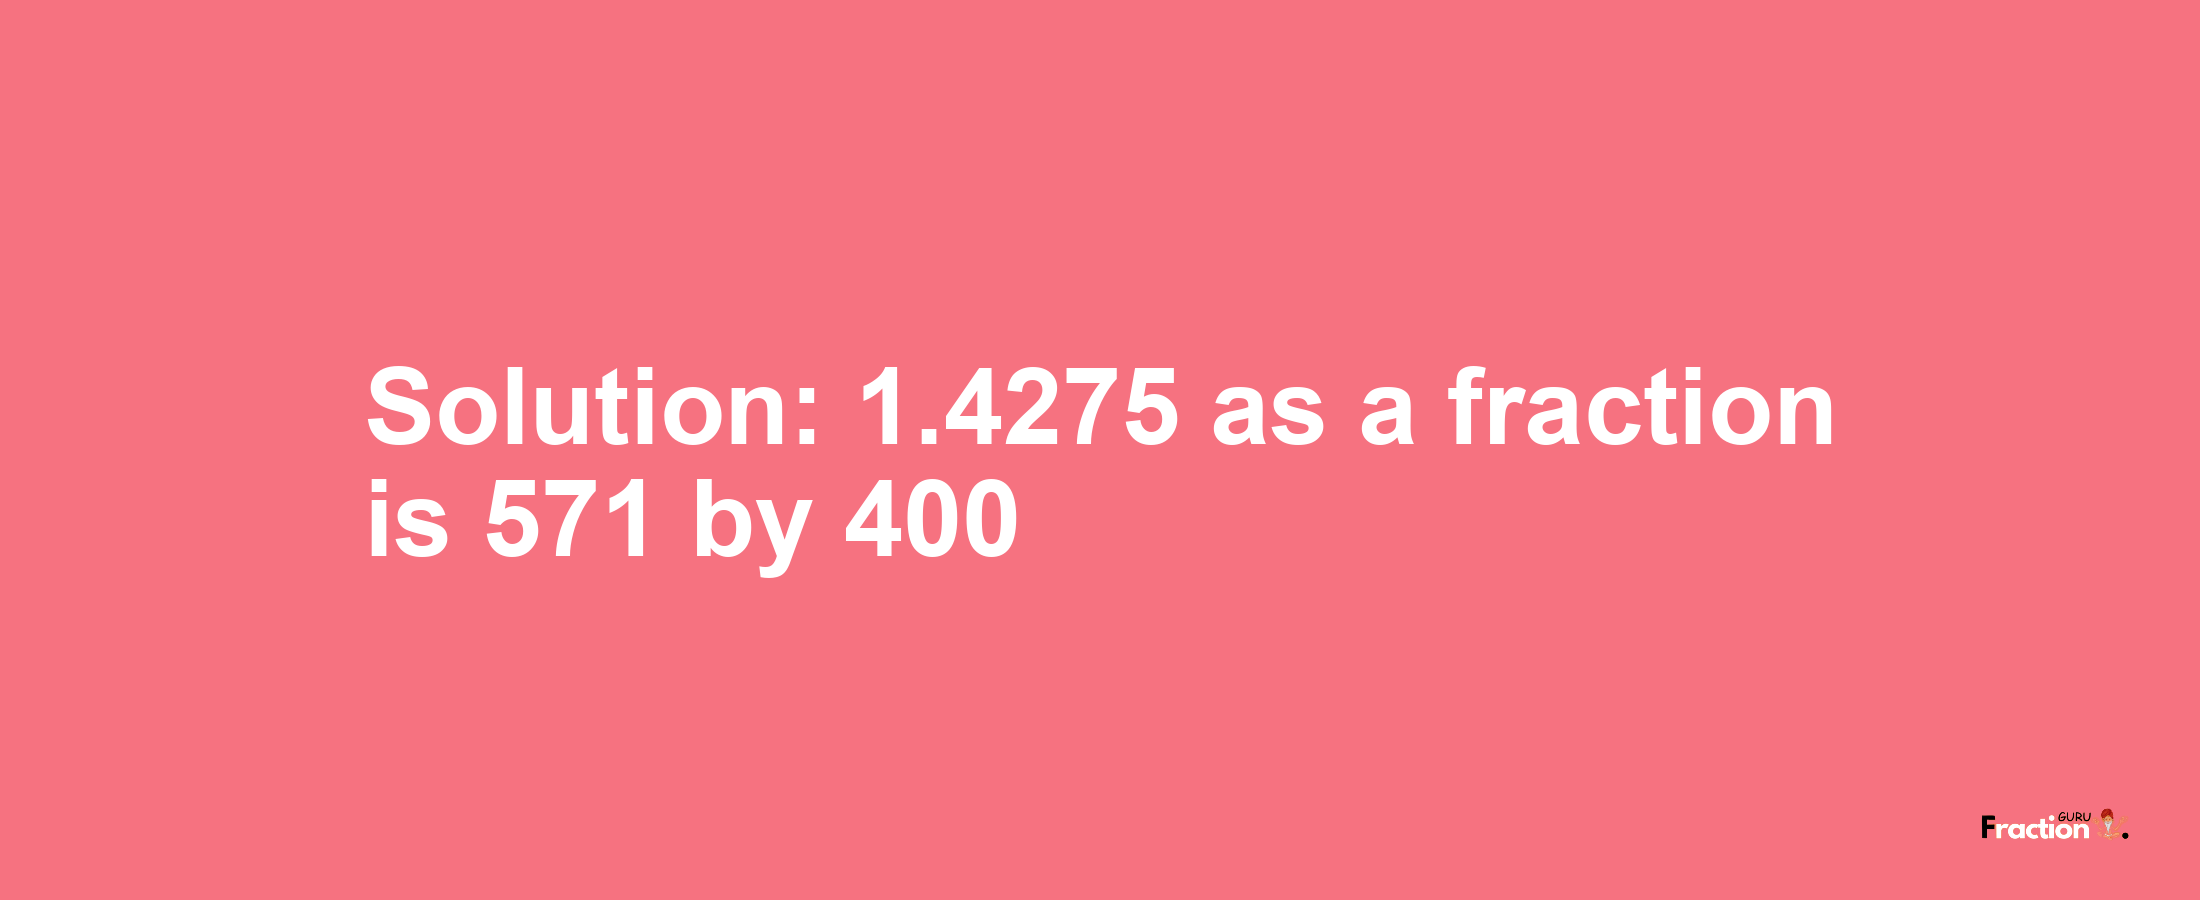 Solution:1.4275 as a fraction is 571/400